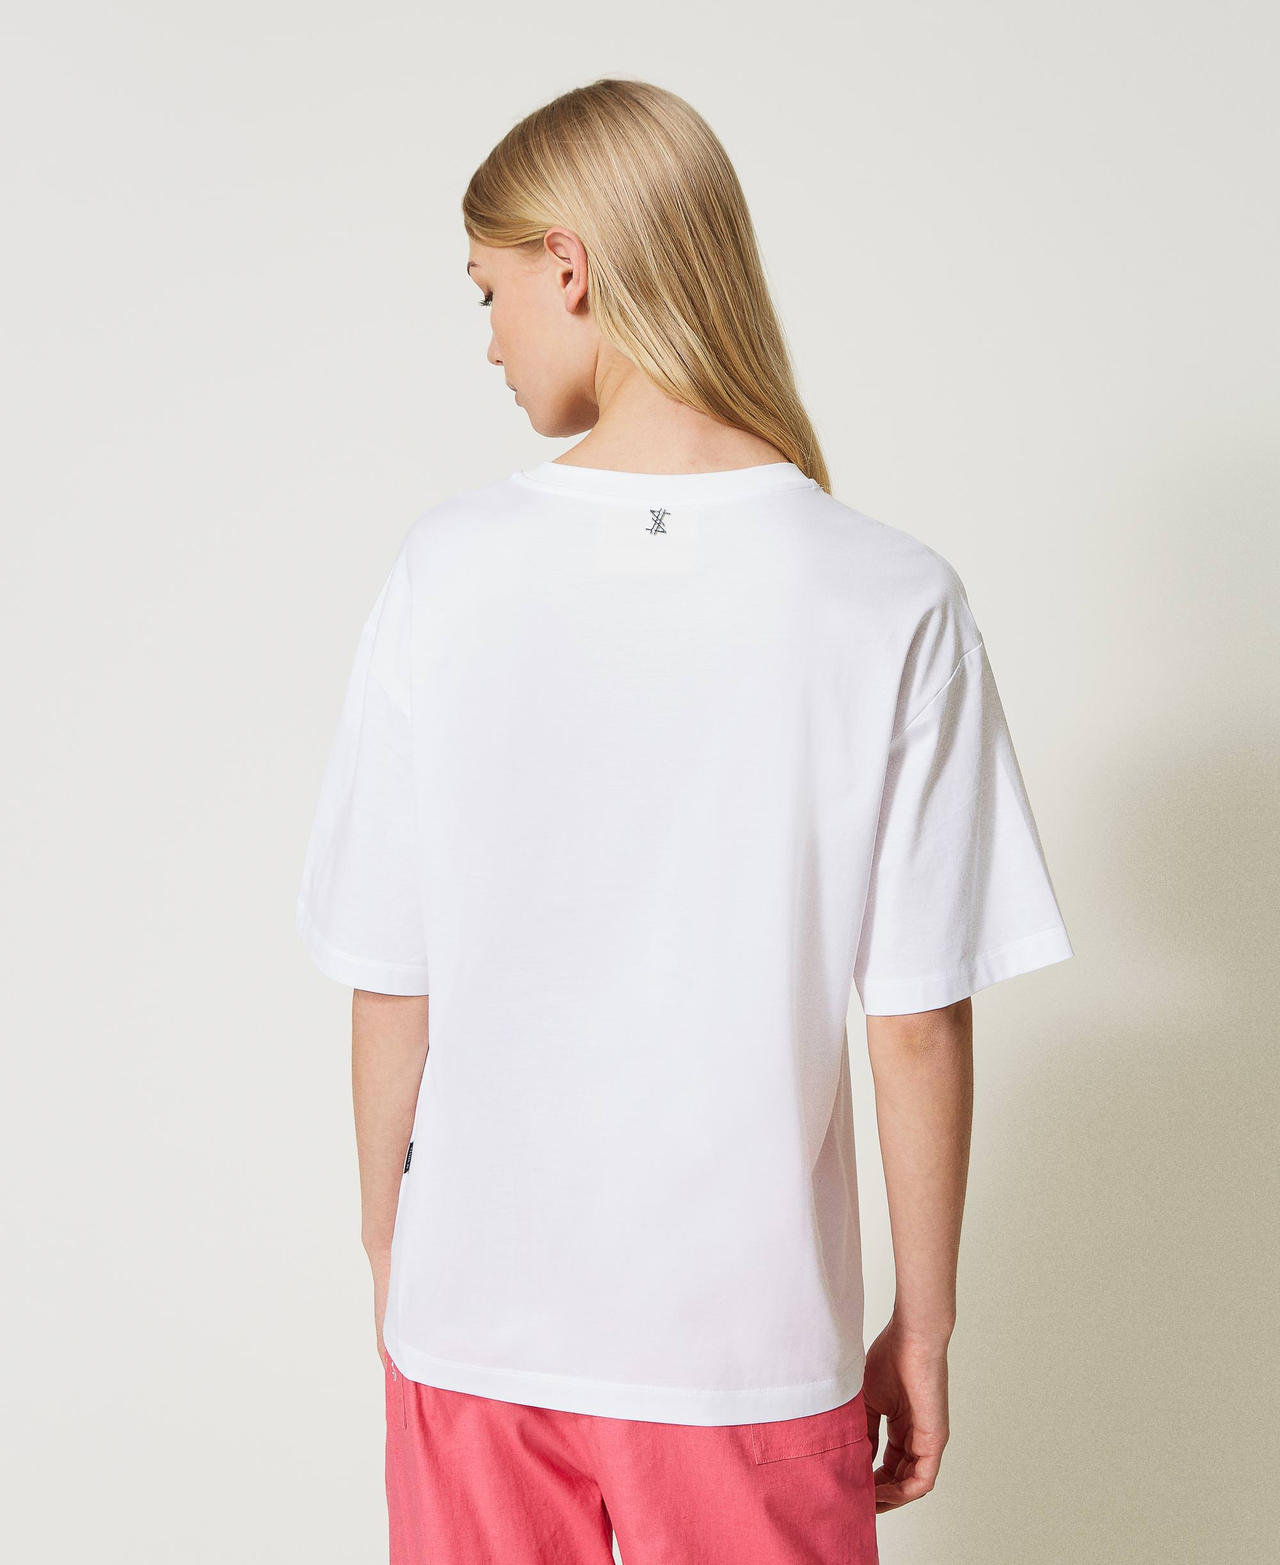 T-shirt MYFO con stampa orsetto Bianco "Papers" Donna 231AQ2013-03